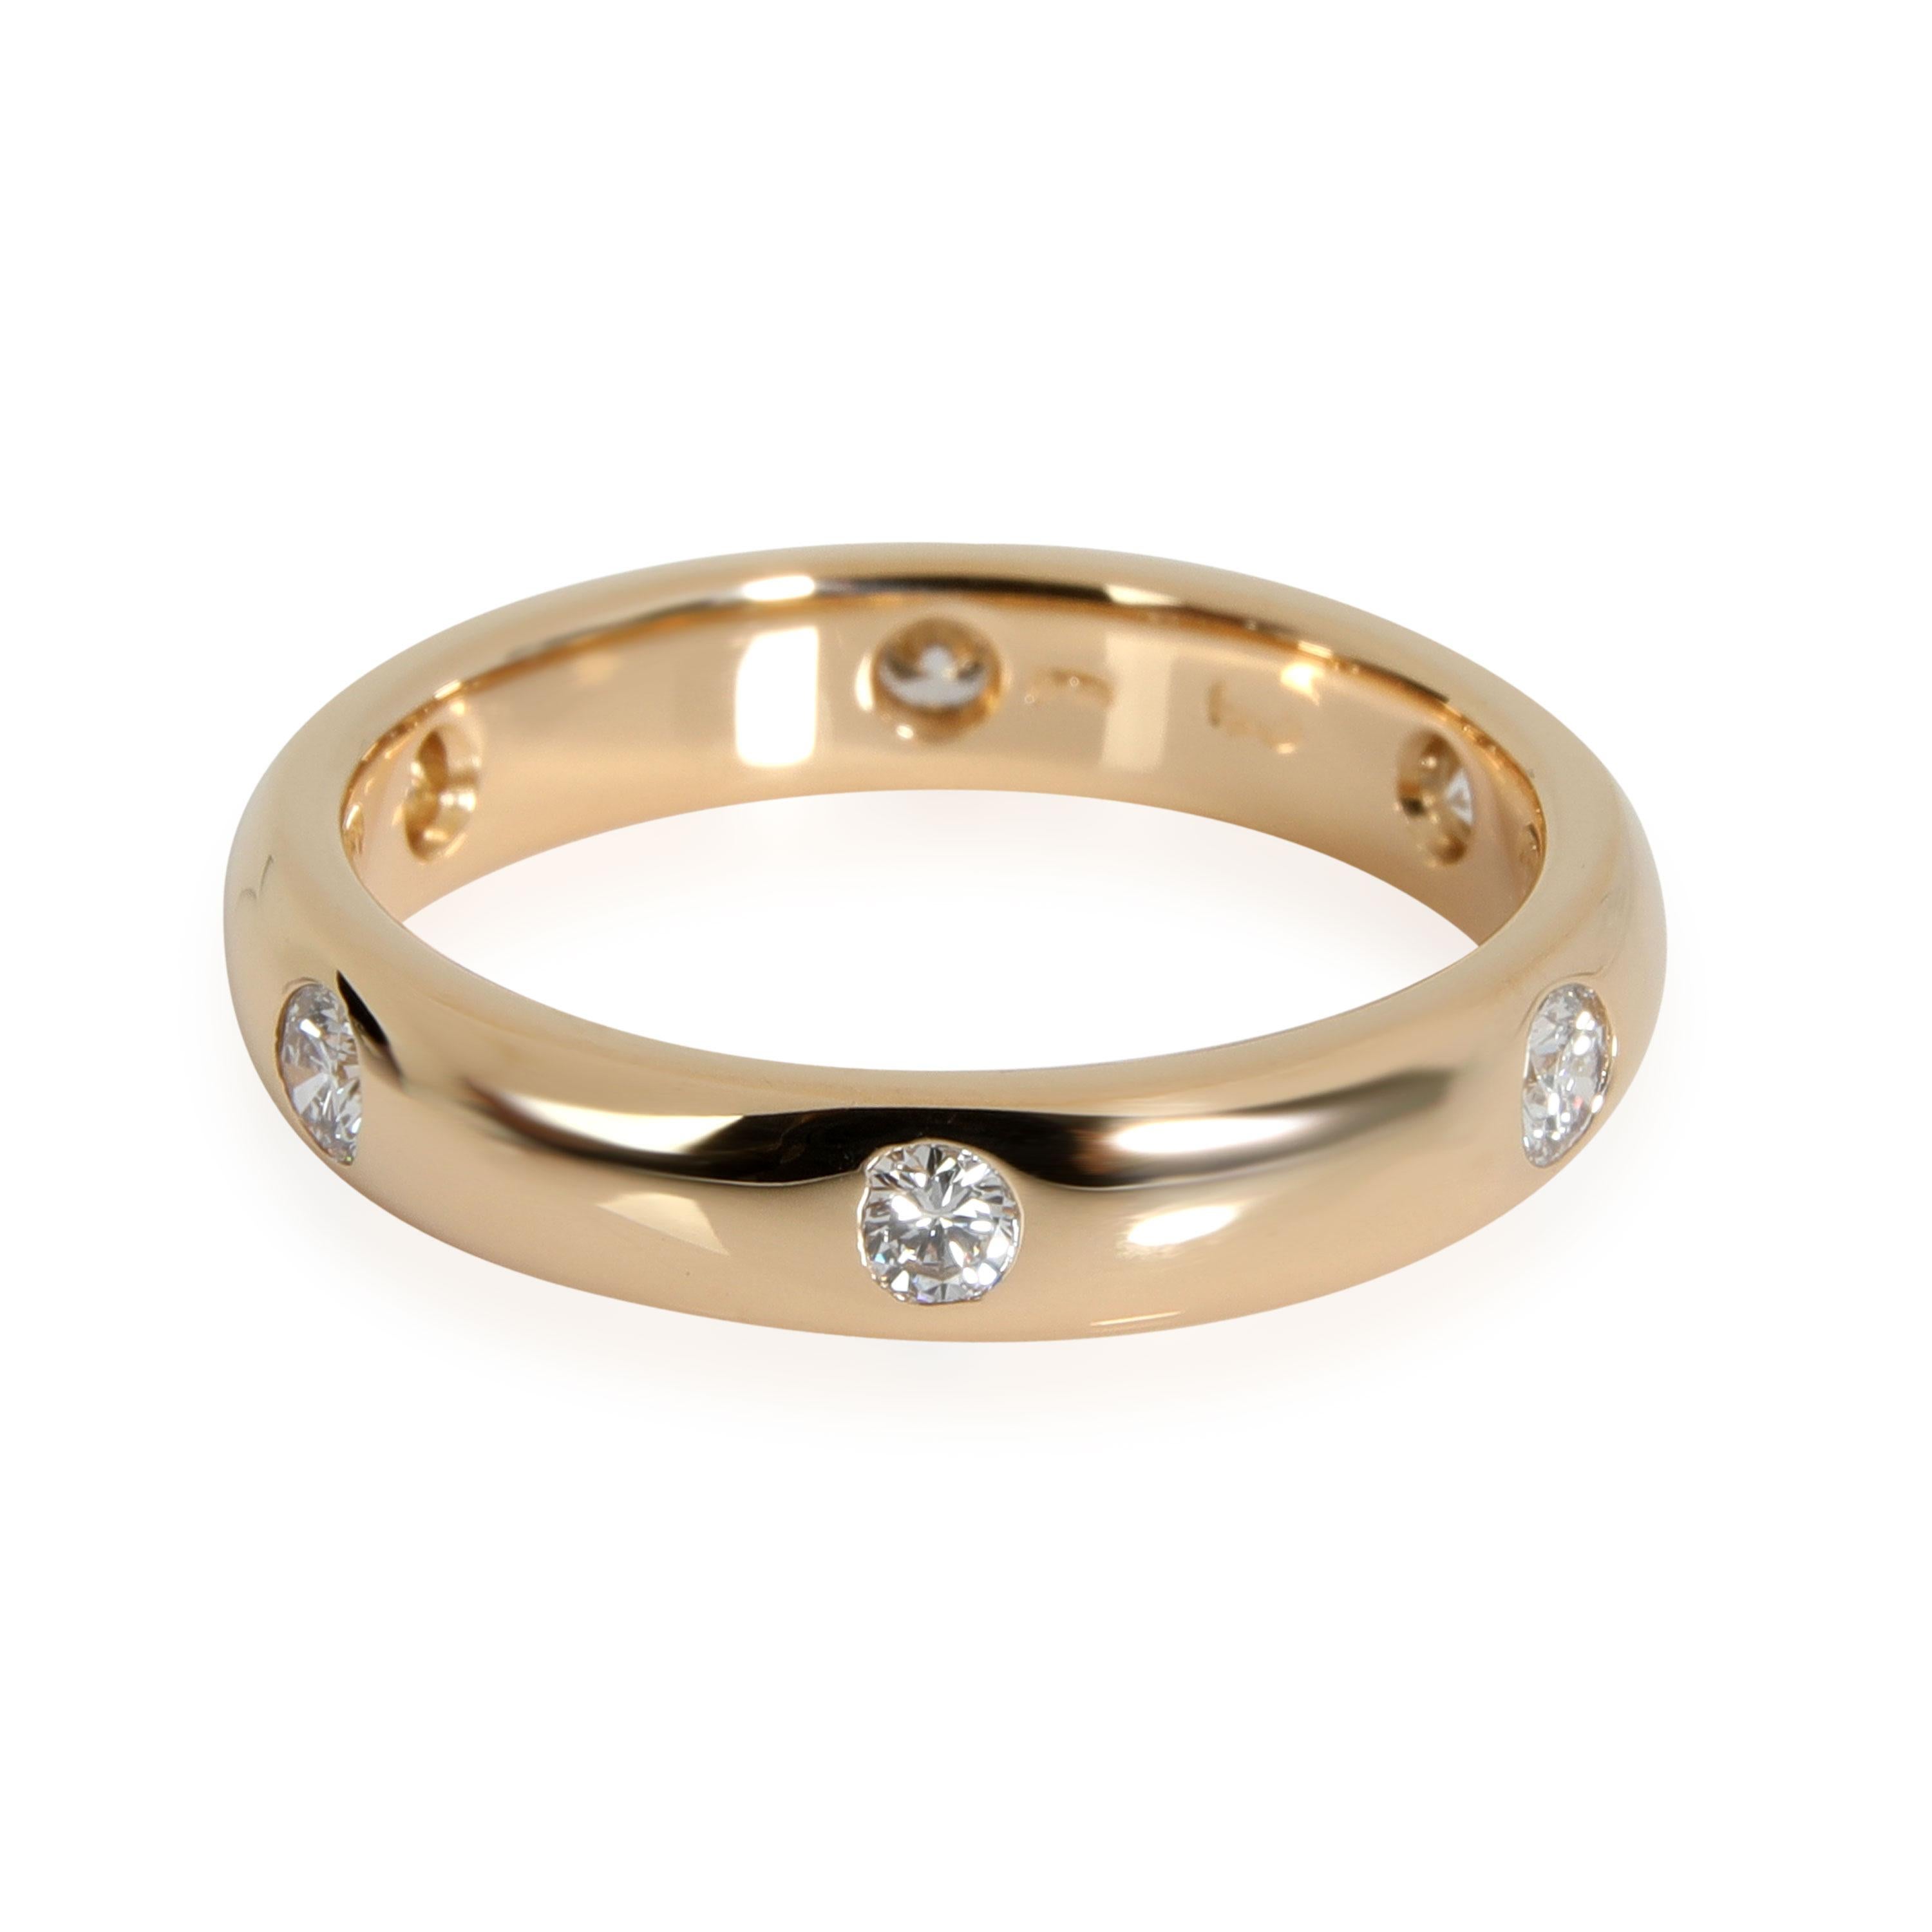 Cartier Stella Diamond Ring in 18k Yellow Gold 0.24 CTW

PRIMARY DETAILS
SKU: 114979
Listing Title: Cartier Stella Diamond Ring in 18k Yellow Gold 0.24 CTW
Condition Description: Retails for 2495 USD. In excellent condition and recently polished.